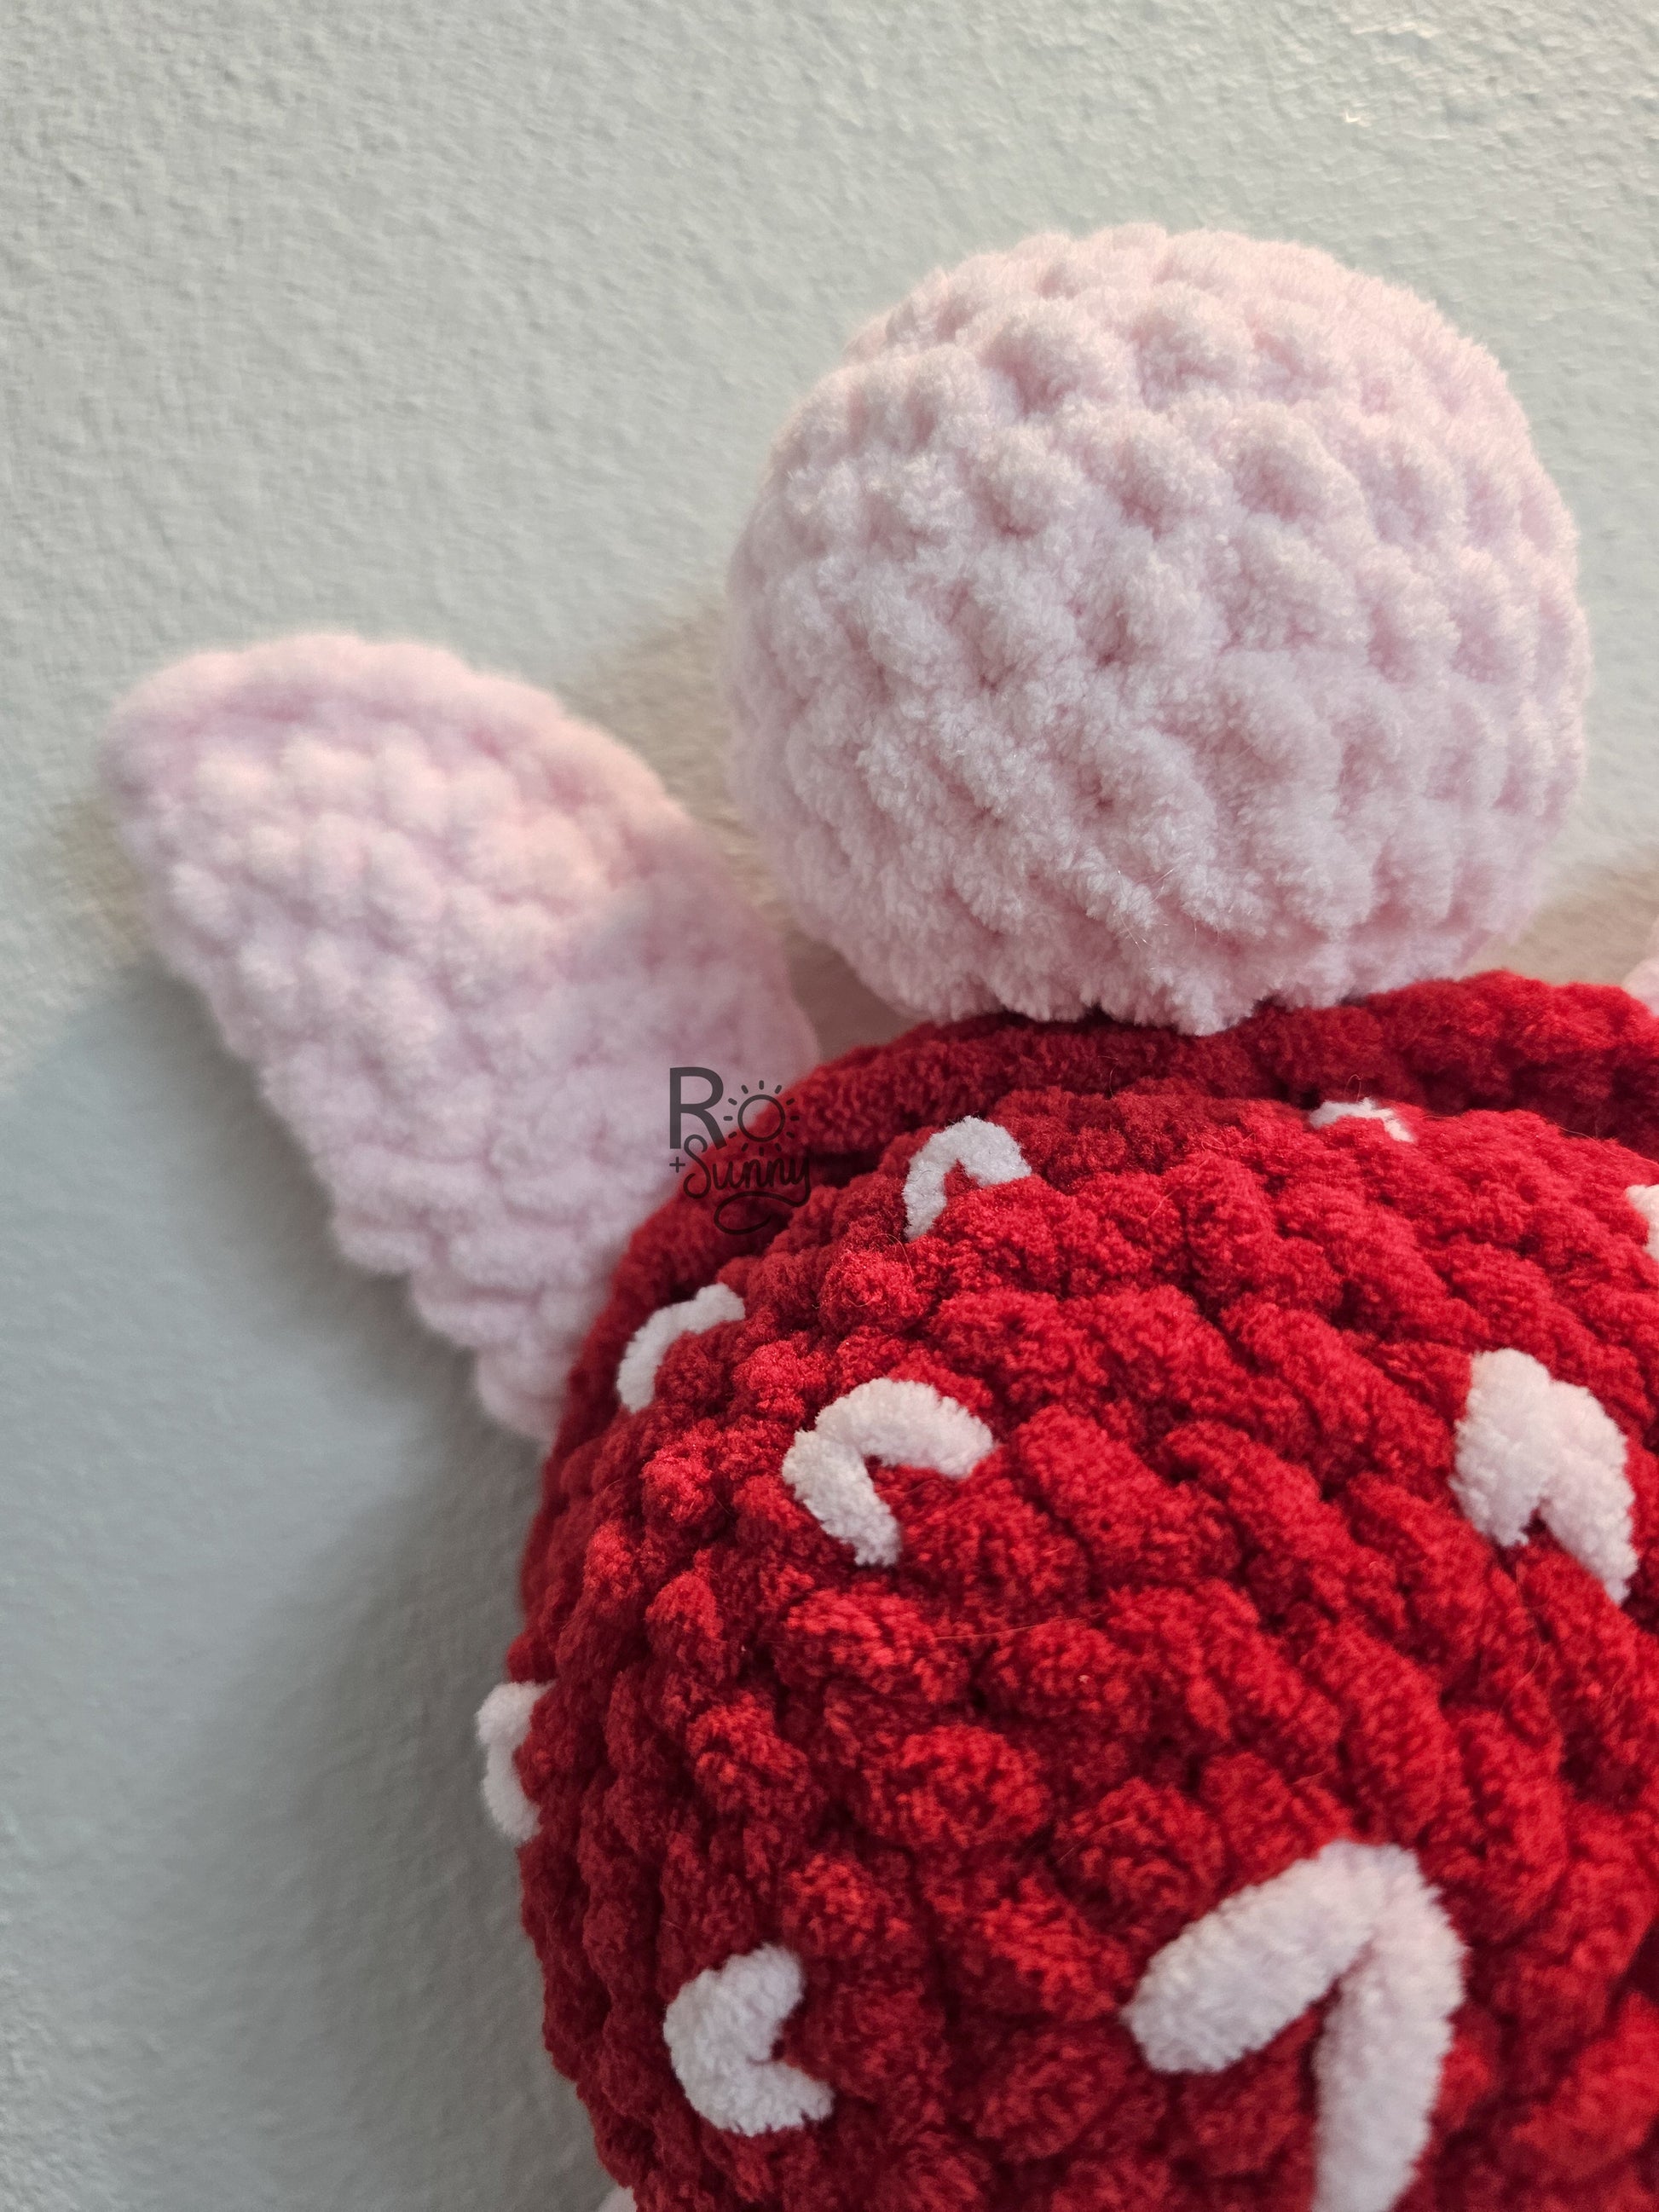 Sea of Love, Closeup - Crochet sea turtle with a light pink body and red shell with white hearts.